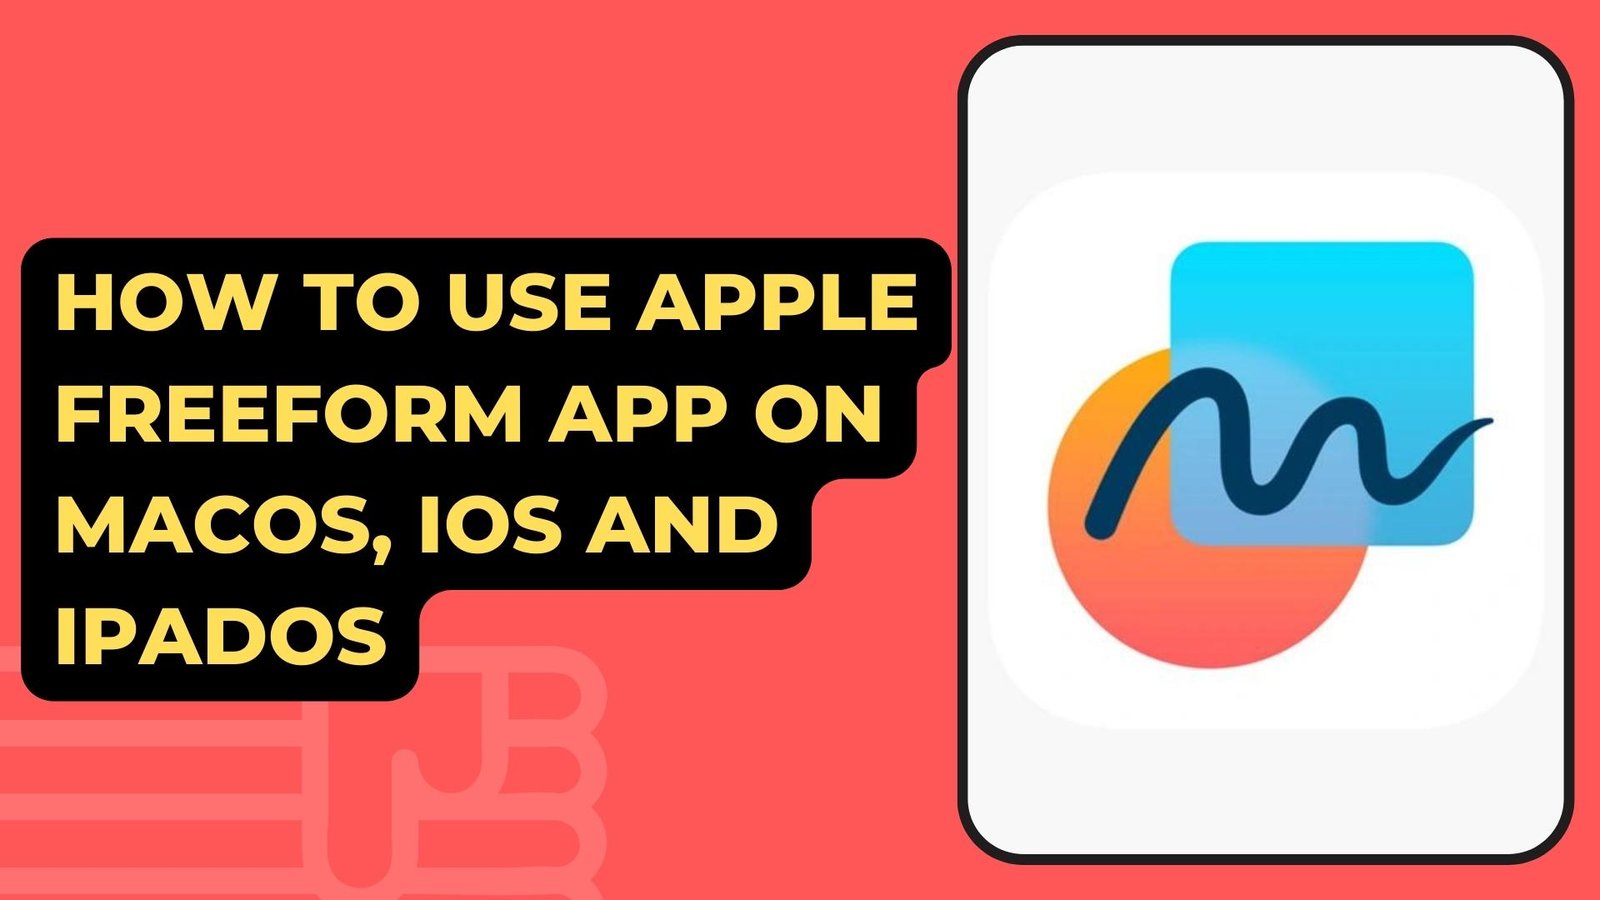 How To Use Apple Freeform App On macOS, iOS And iPadOS